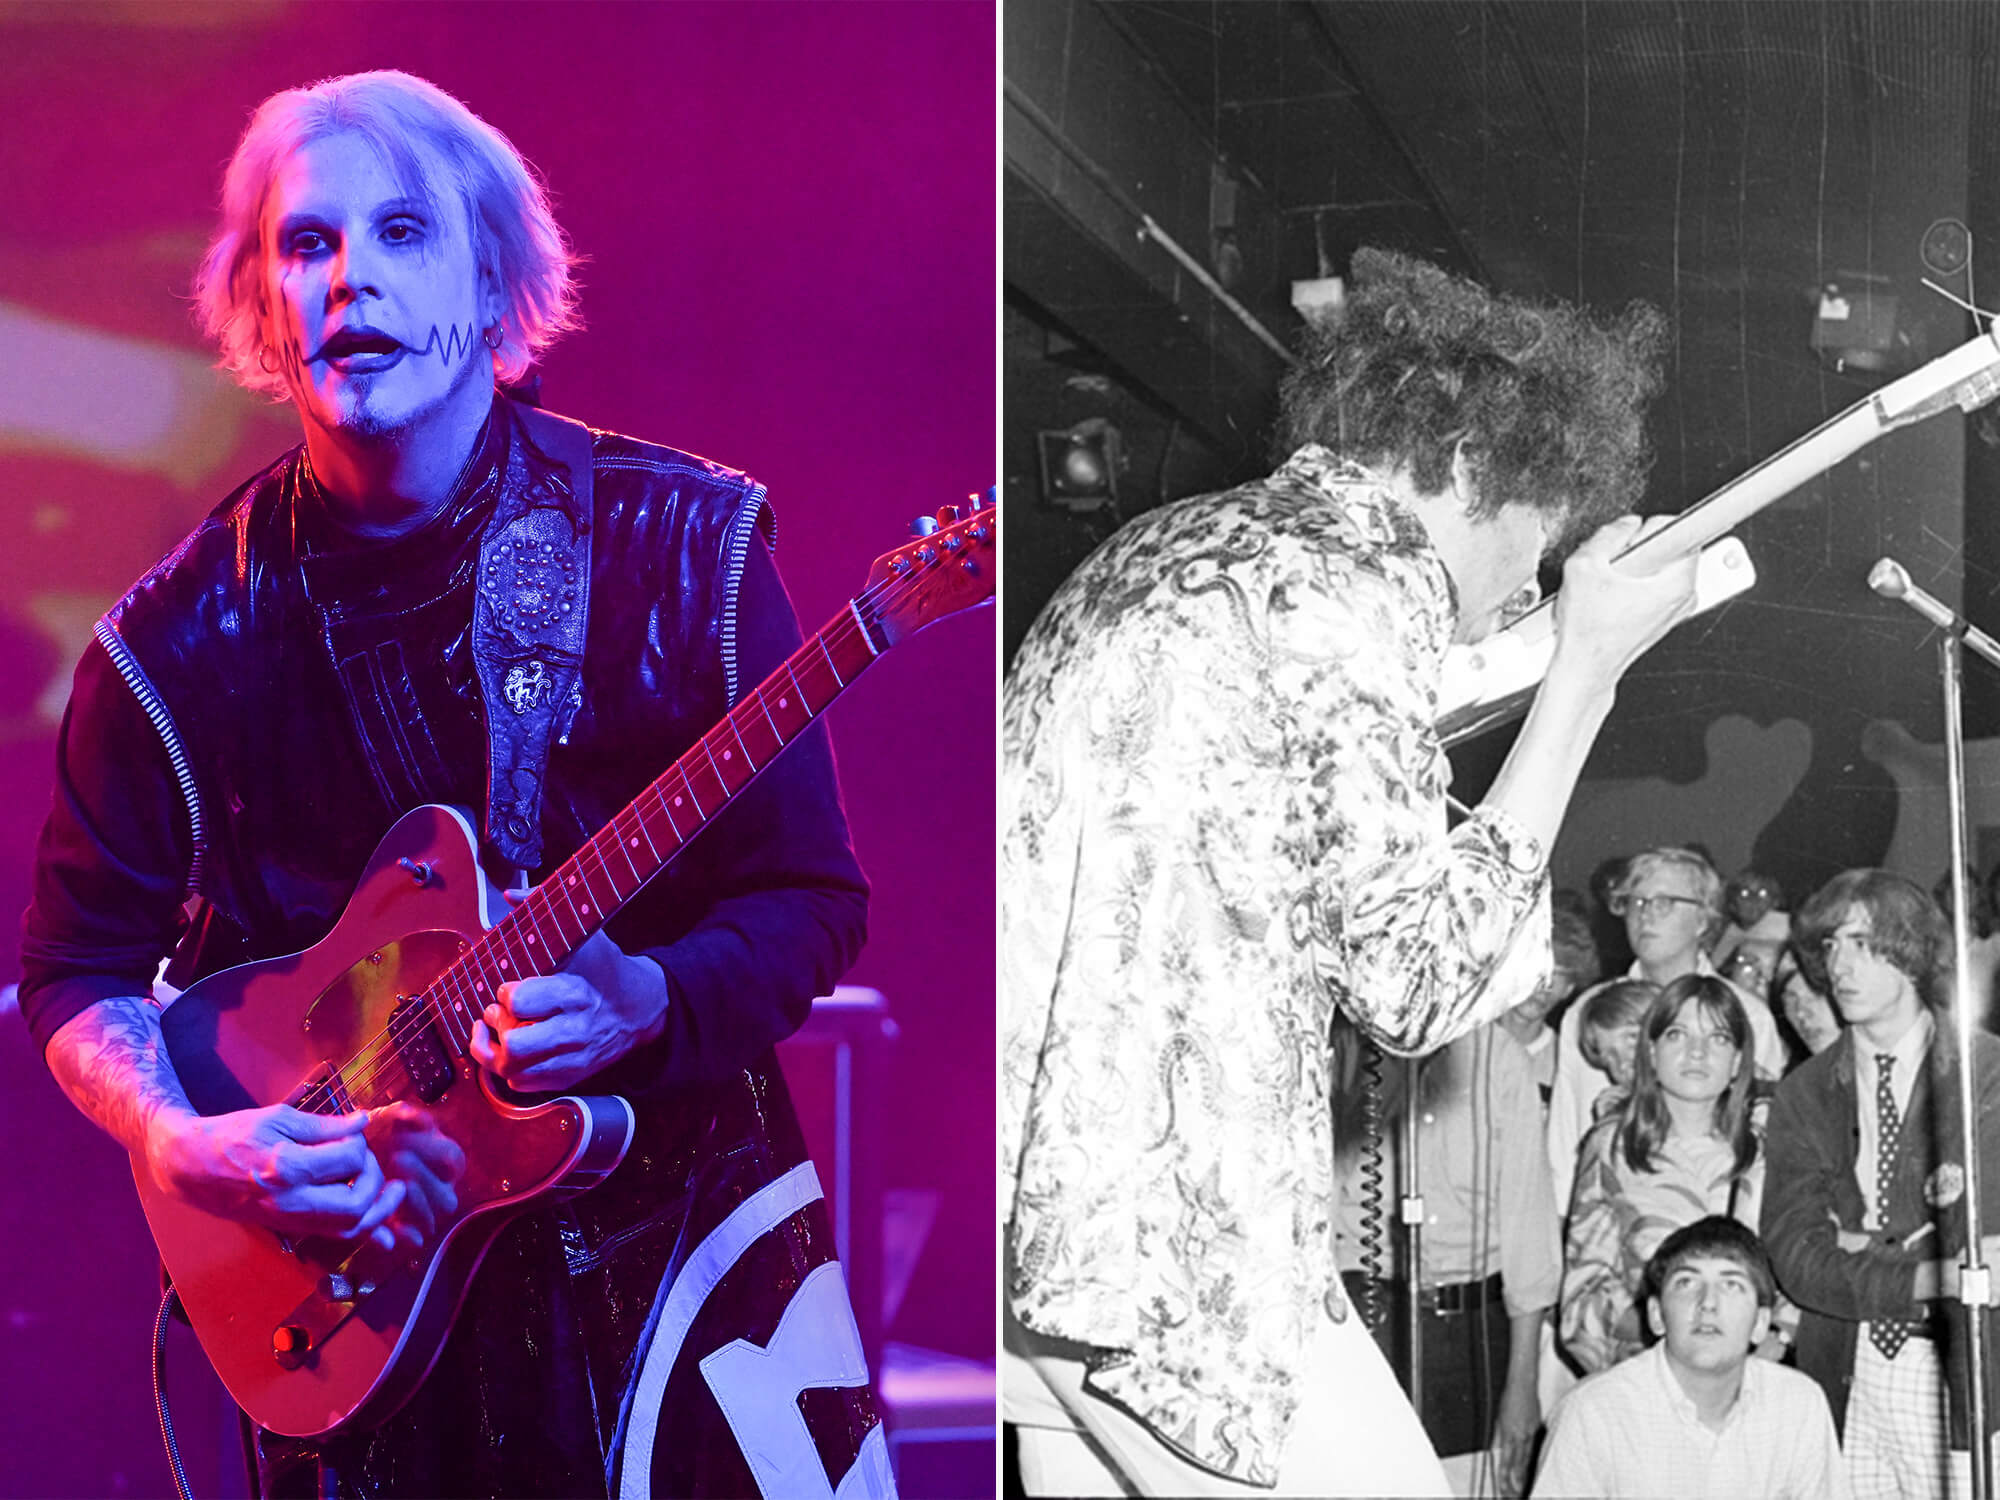 John 5 (left) playing his Tele on stage. Jimi Hendrix (right) photographed in black and white playing guitar with his teeth.